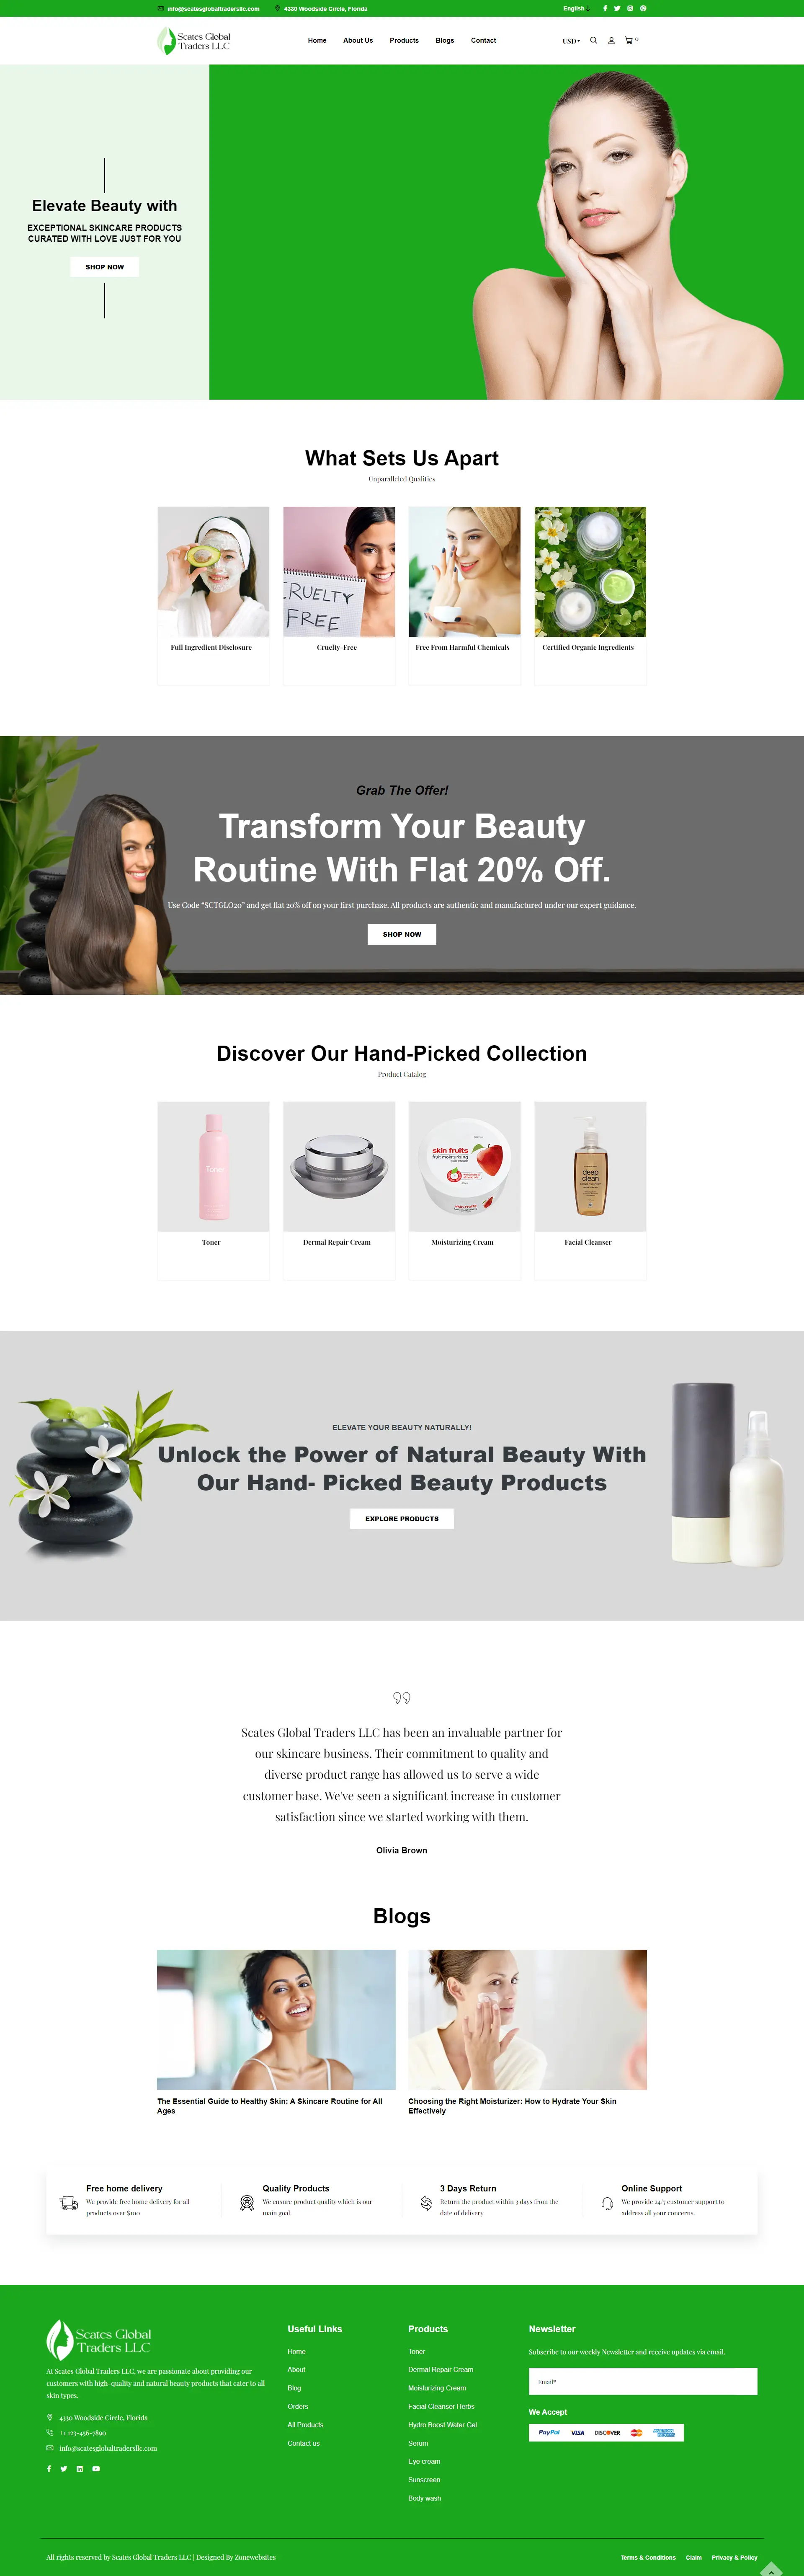 Scates Global - One-stop Shop for Premier Skincare Essentials